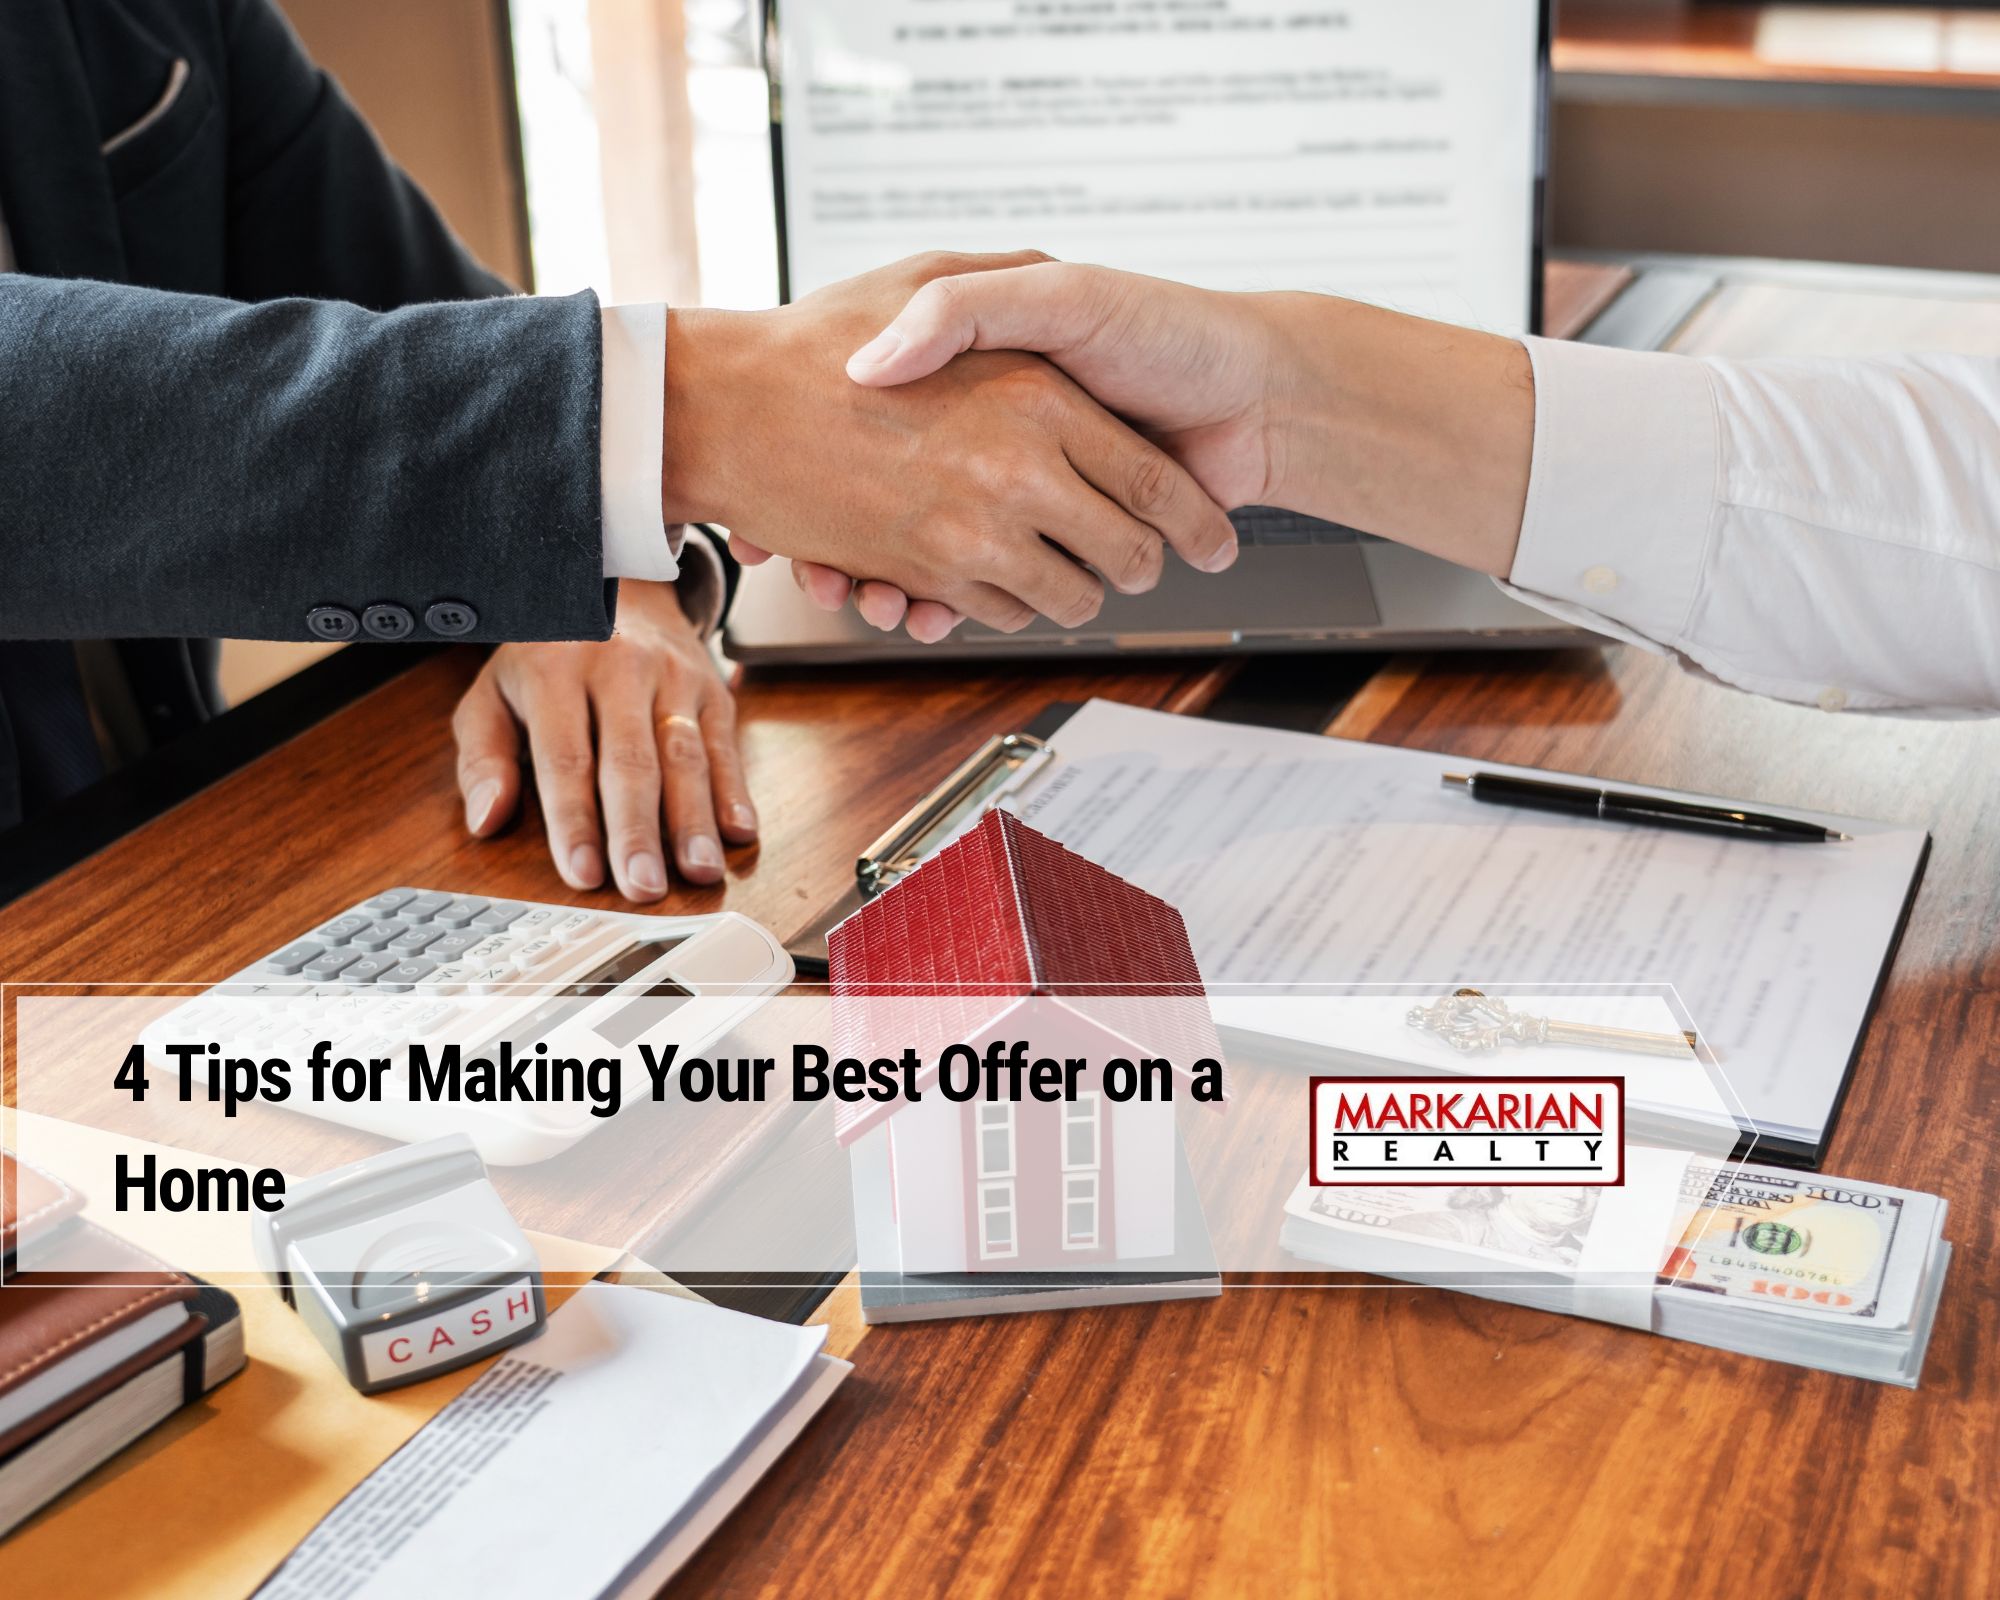 4 Tips for Making Your Best Offer on a Home